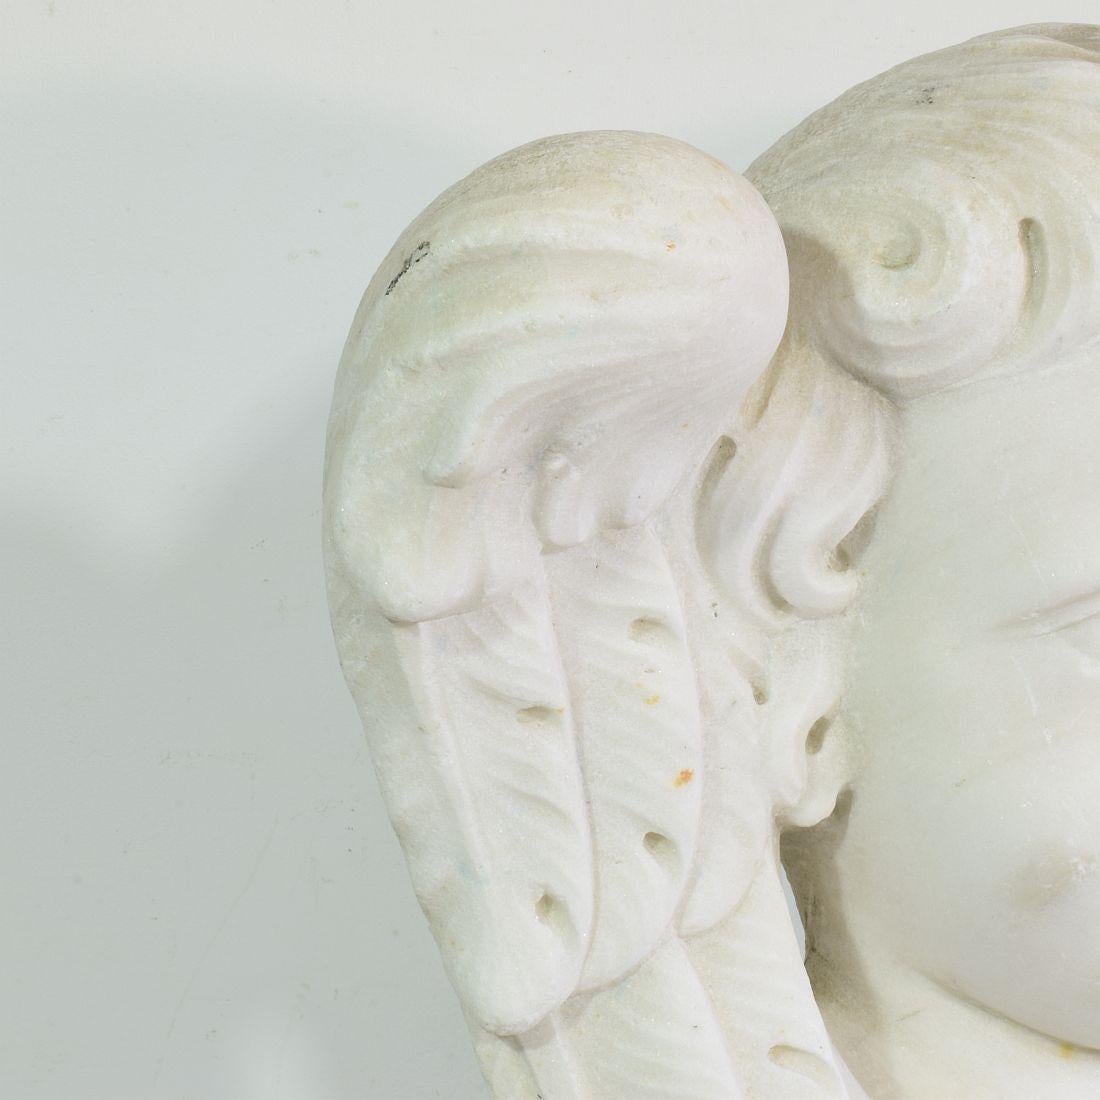 Italian, 17th / 18th Century Carved White Marble Winged Angel Head Ornament For Sale 4